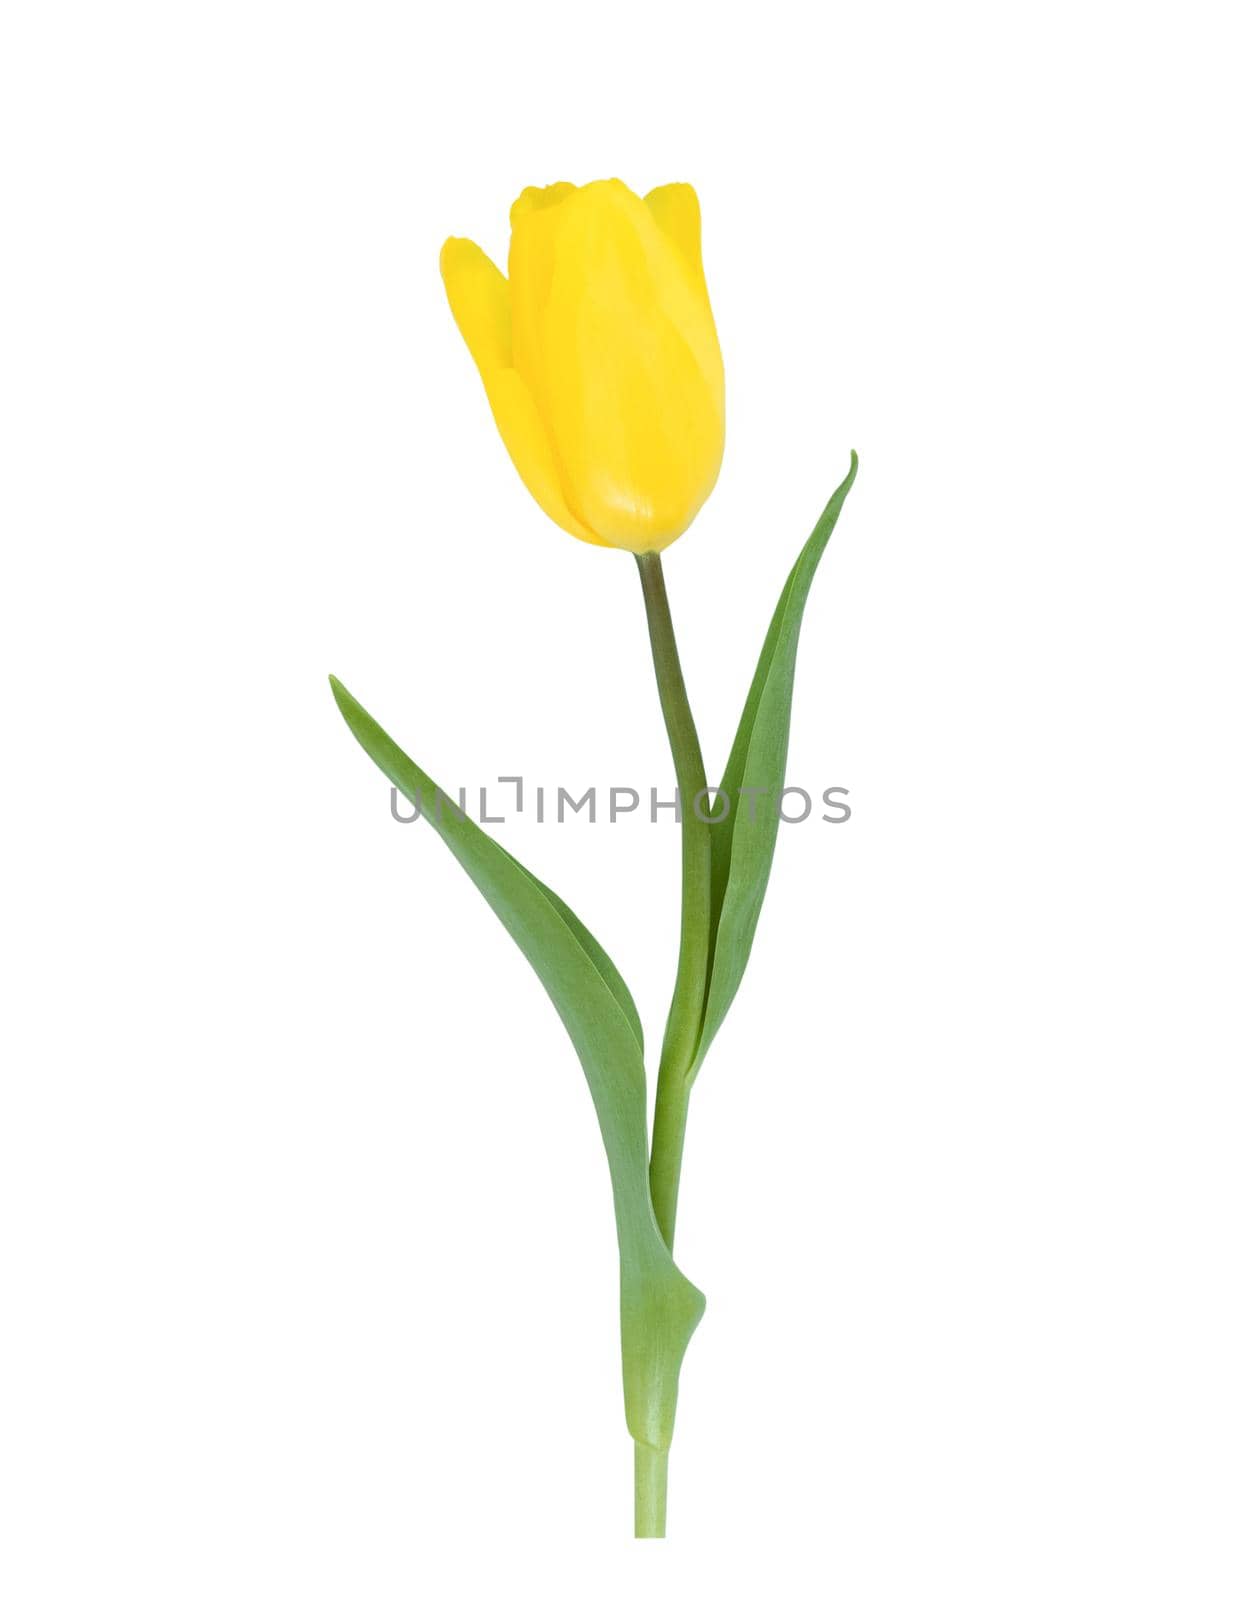 One yellow tulip isolated on a white background.